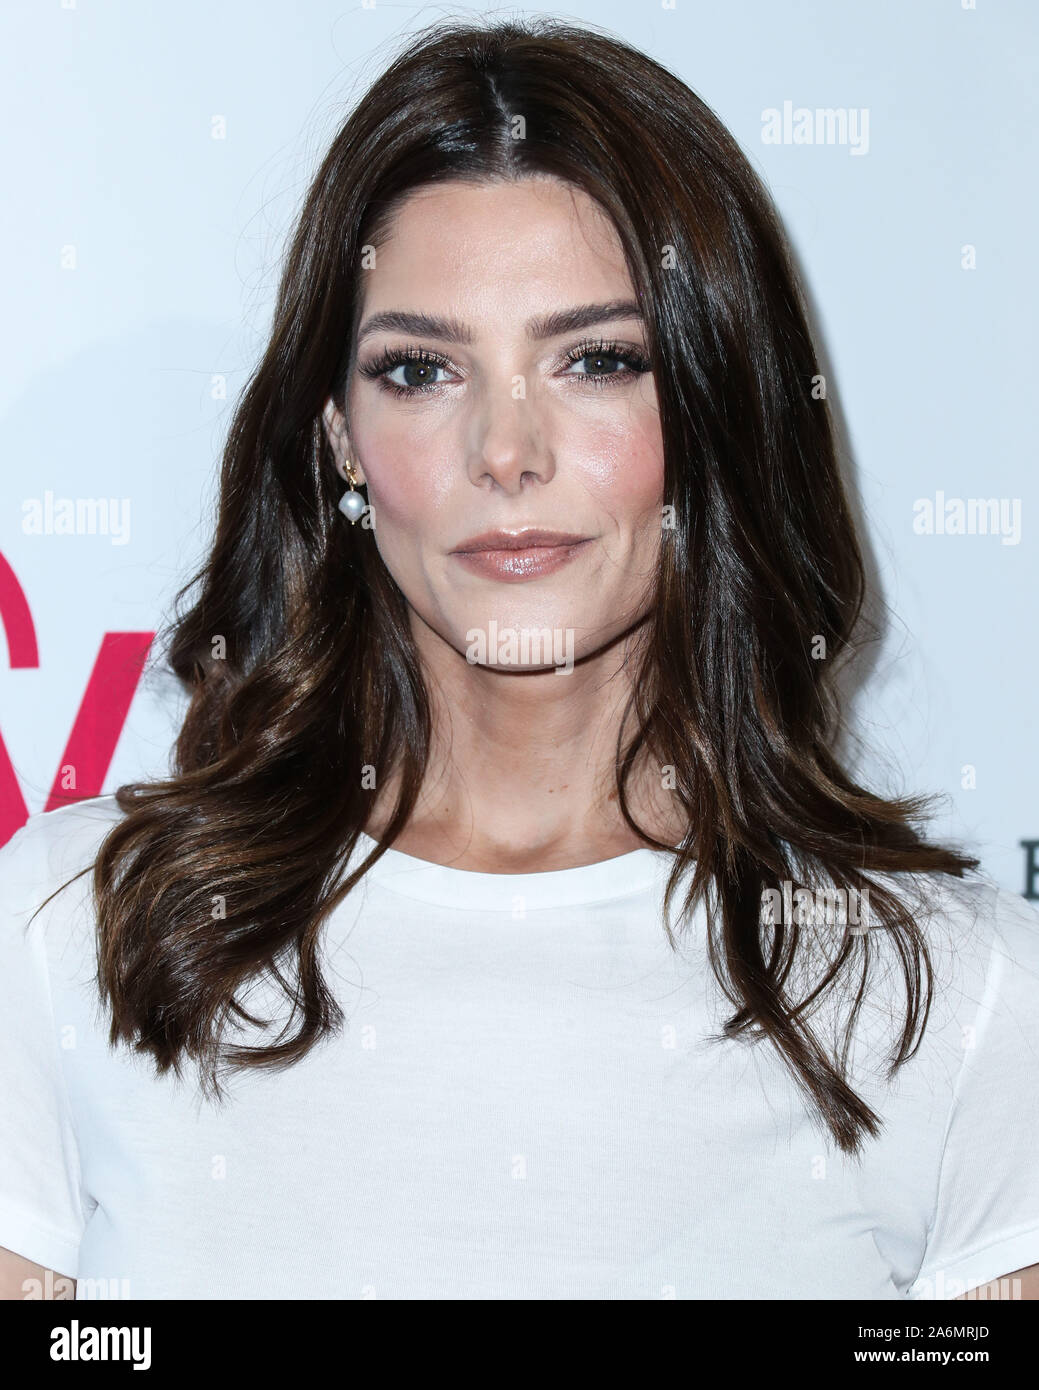 Culver City, USA. 27th Oct, 2019. CULVER CITY, LOS ANGELES, CALIFORNIA, USA - OCTOBER 27: Actress Ashley Greene arrives at the Elizabeth Glaser Pediatric AIDS Foundation's 30th Annual A Time for Heroes Family Festival held at Smashbox Studios on October 27, 2019 in Culver City, Los Angeles, California, USA. (Photo by Xavier Collin/Image Press Agency) Credit: Image Press Agency/Alamy Live News Stock Photo